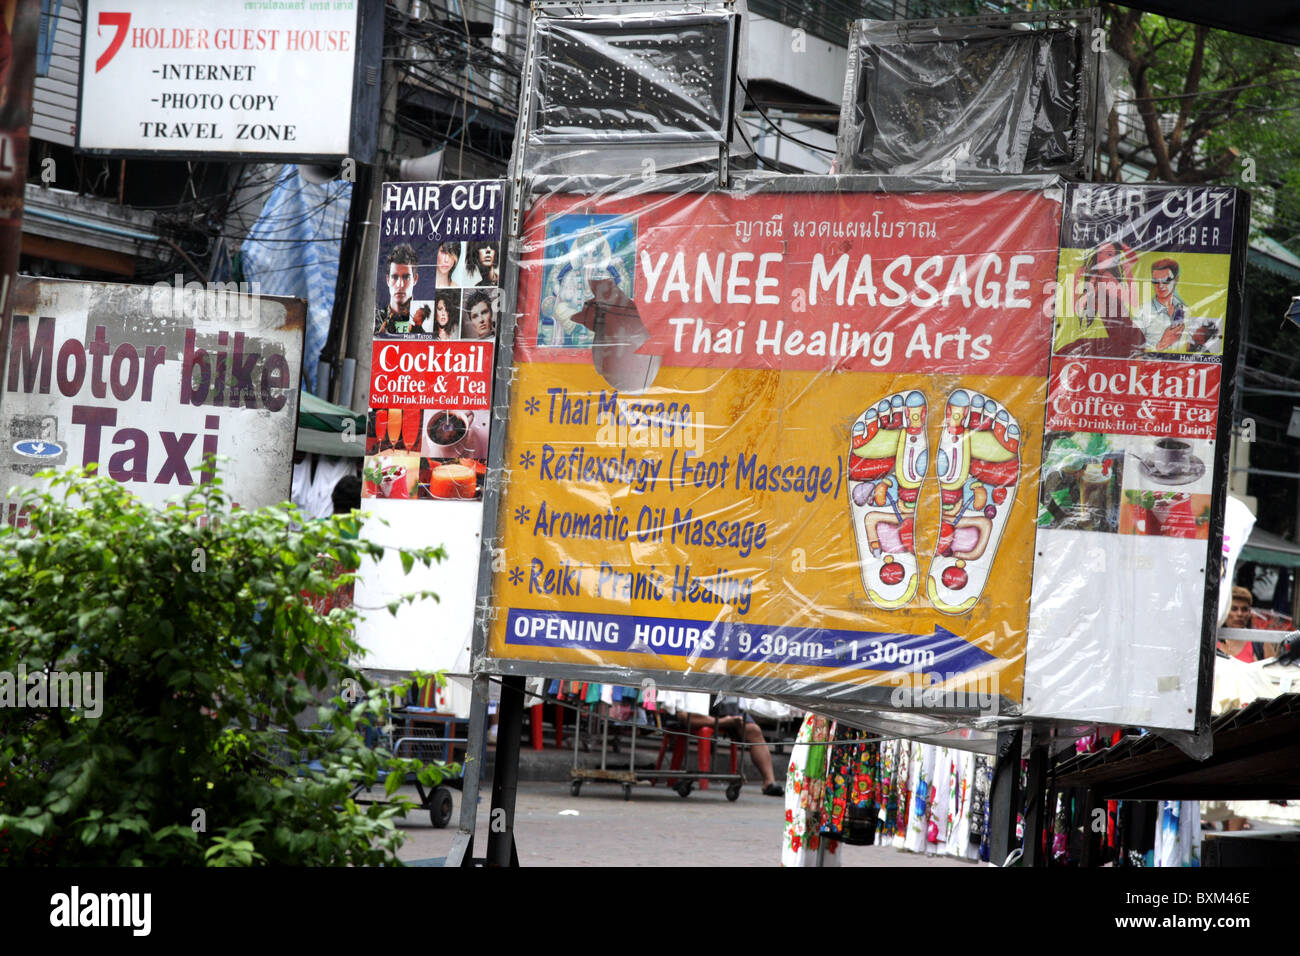 Thai Massage Sign High Resolution Stock Photography and Images - Alamy